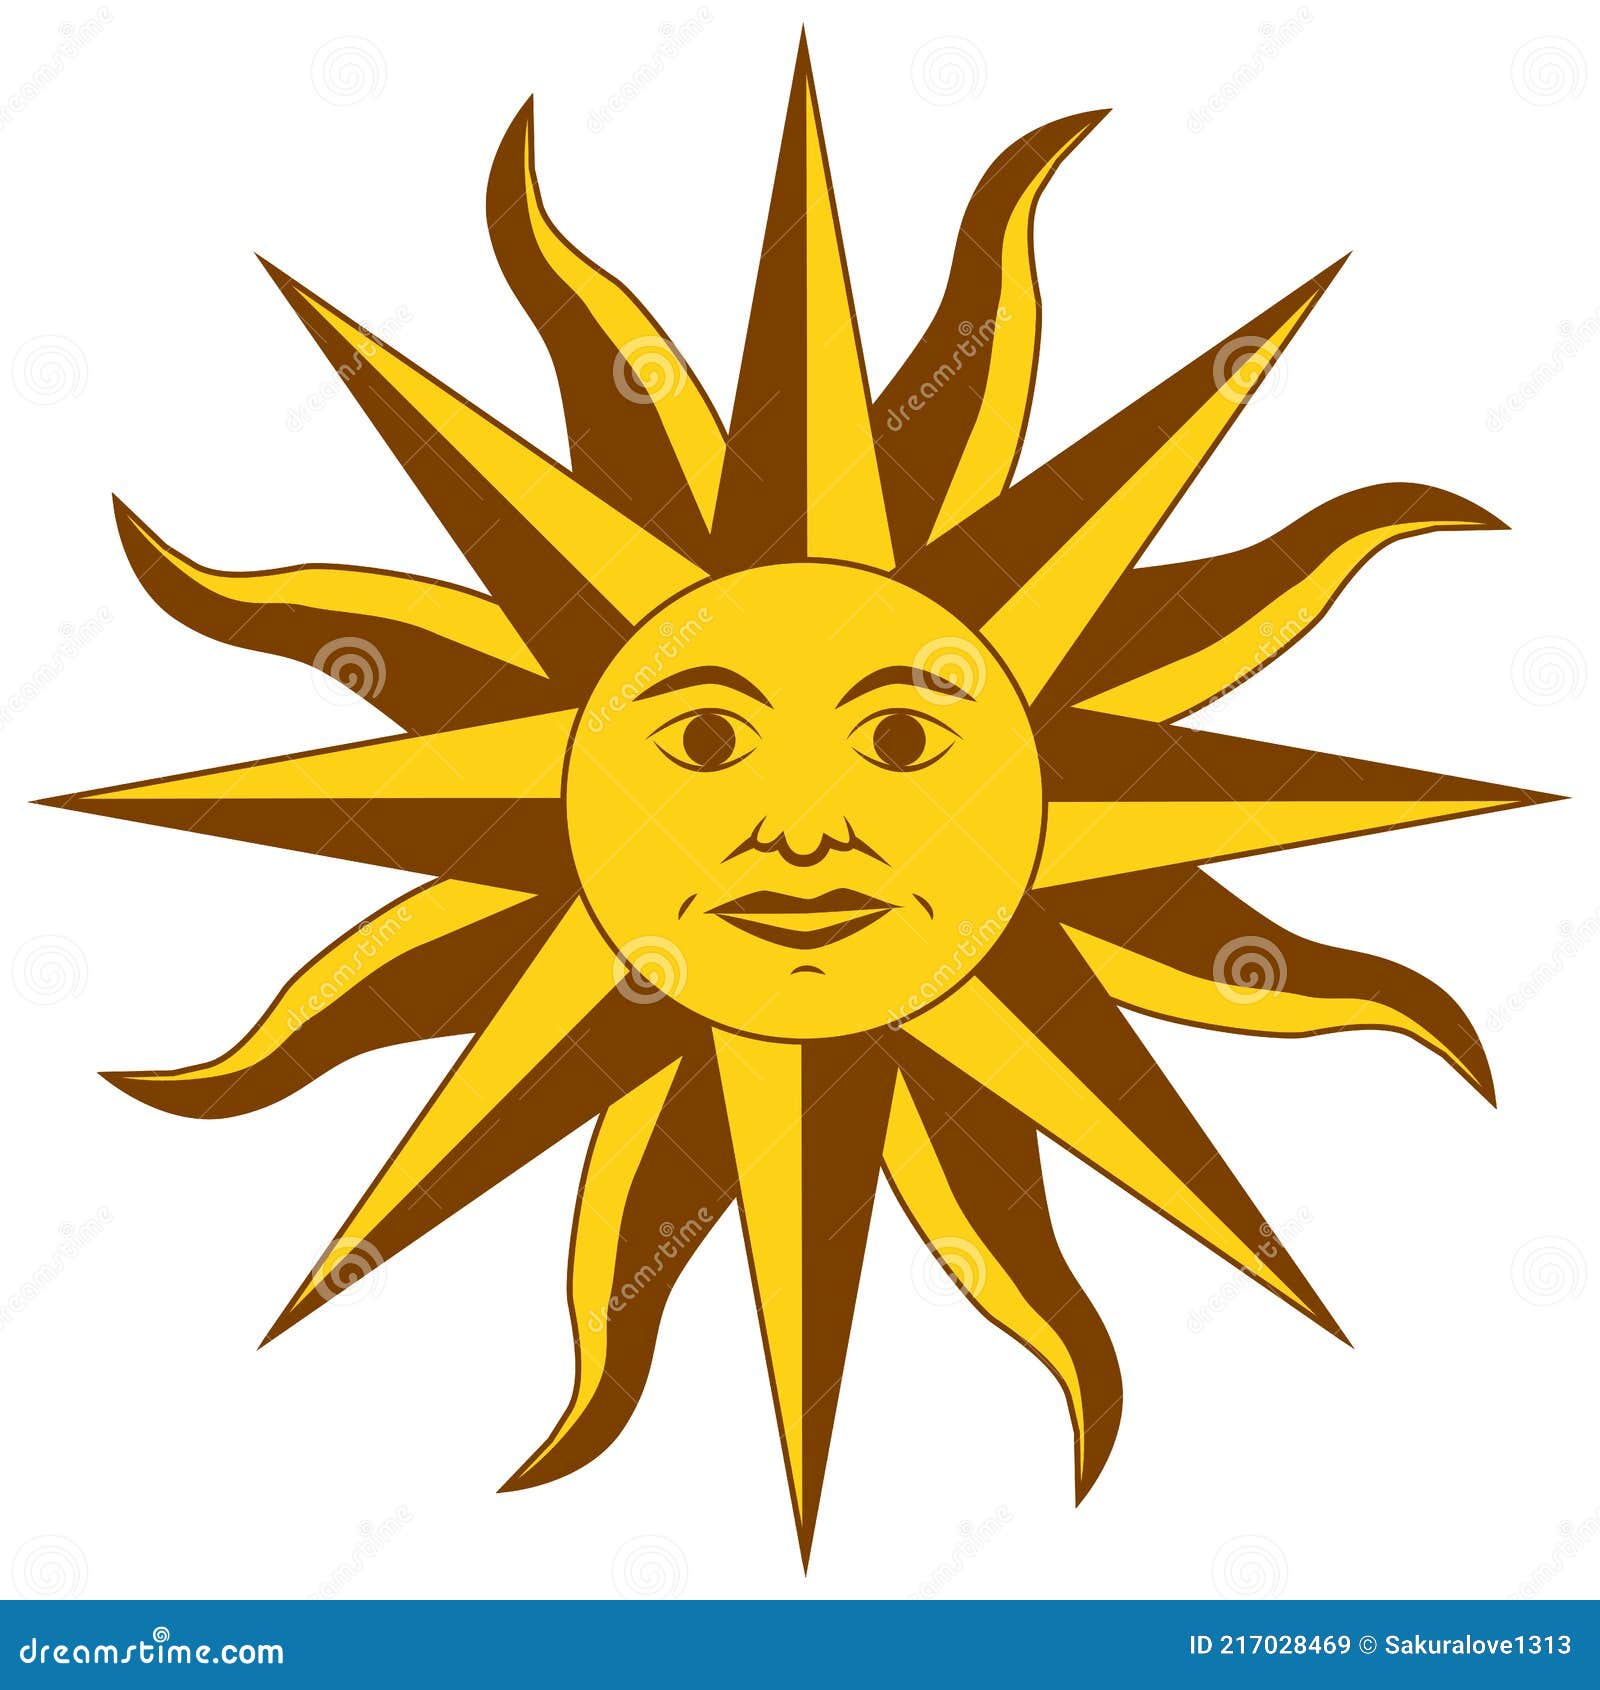 Scandinavian Print Or Poster With Cute Smiling Sun Icons Illustration